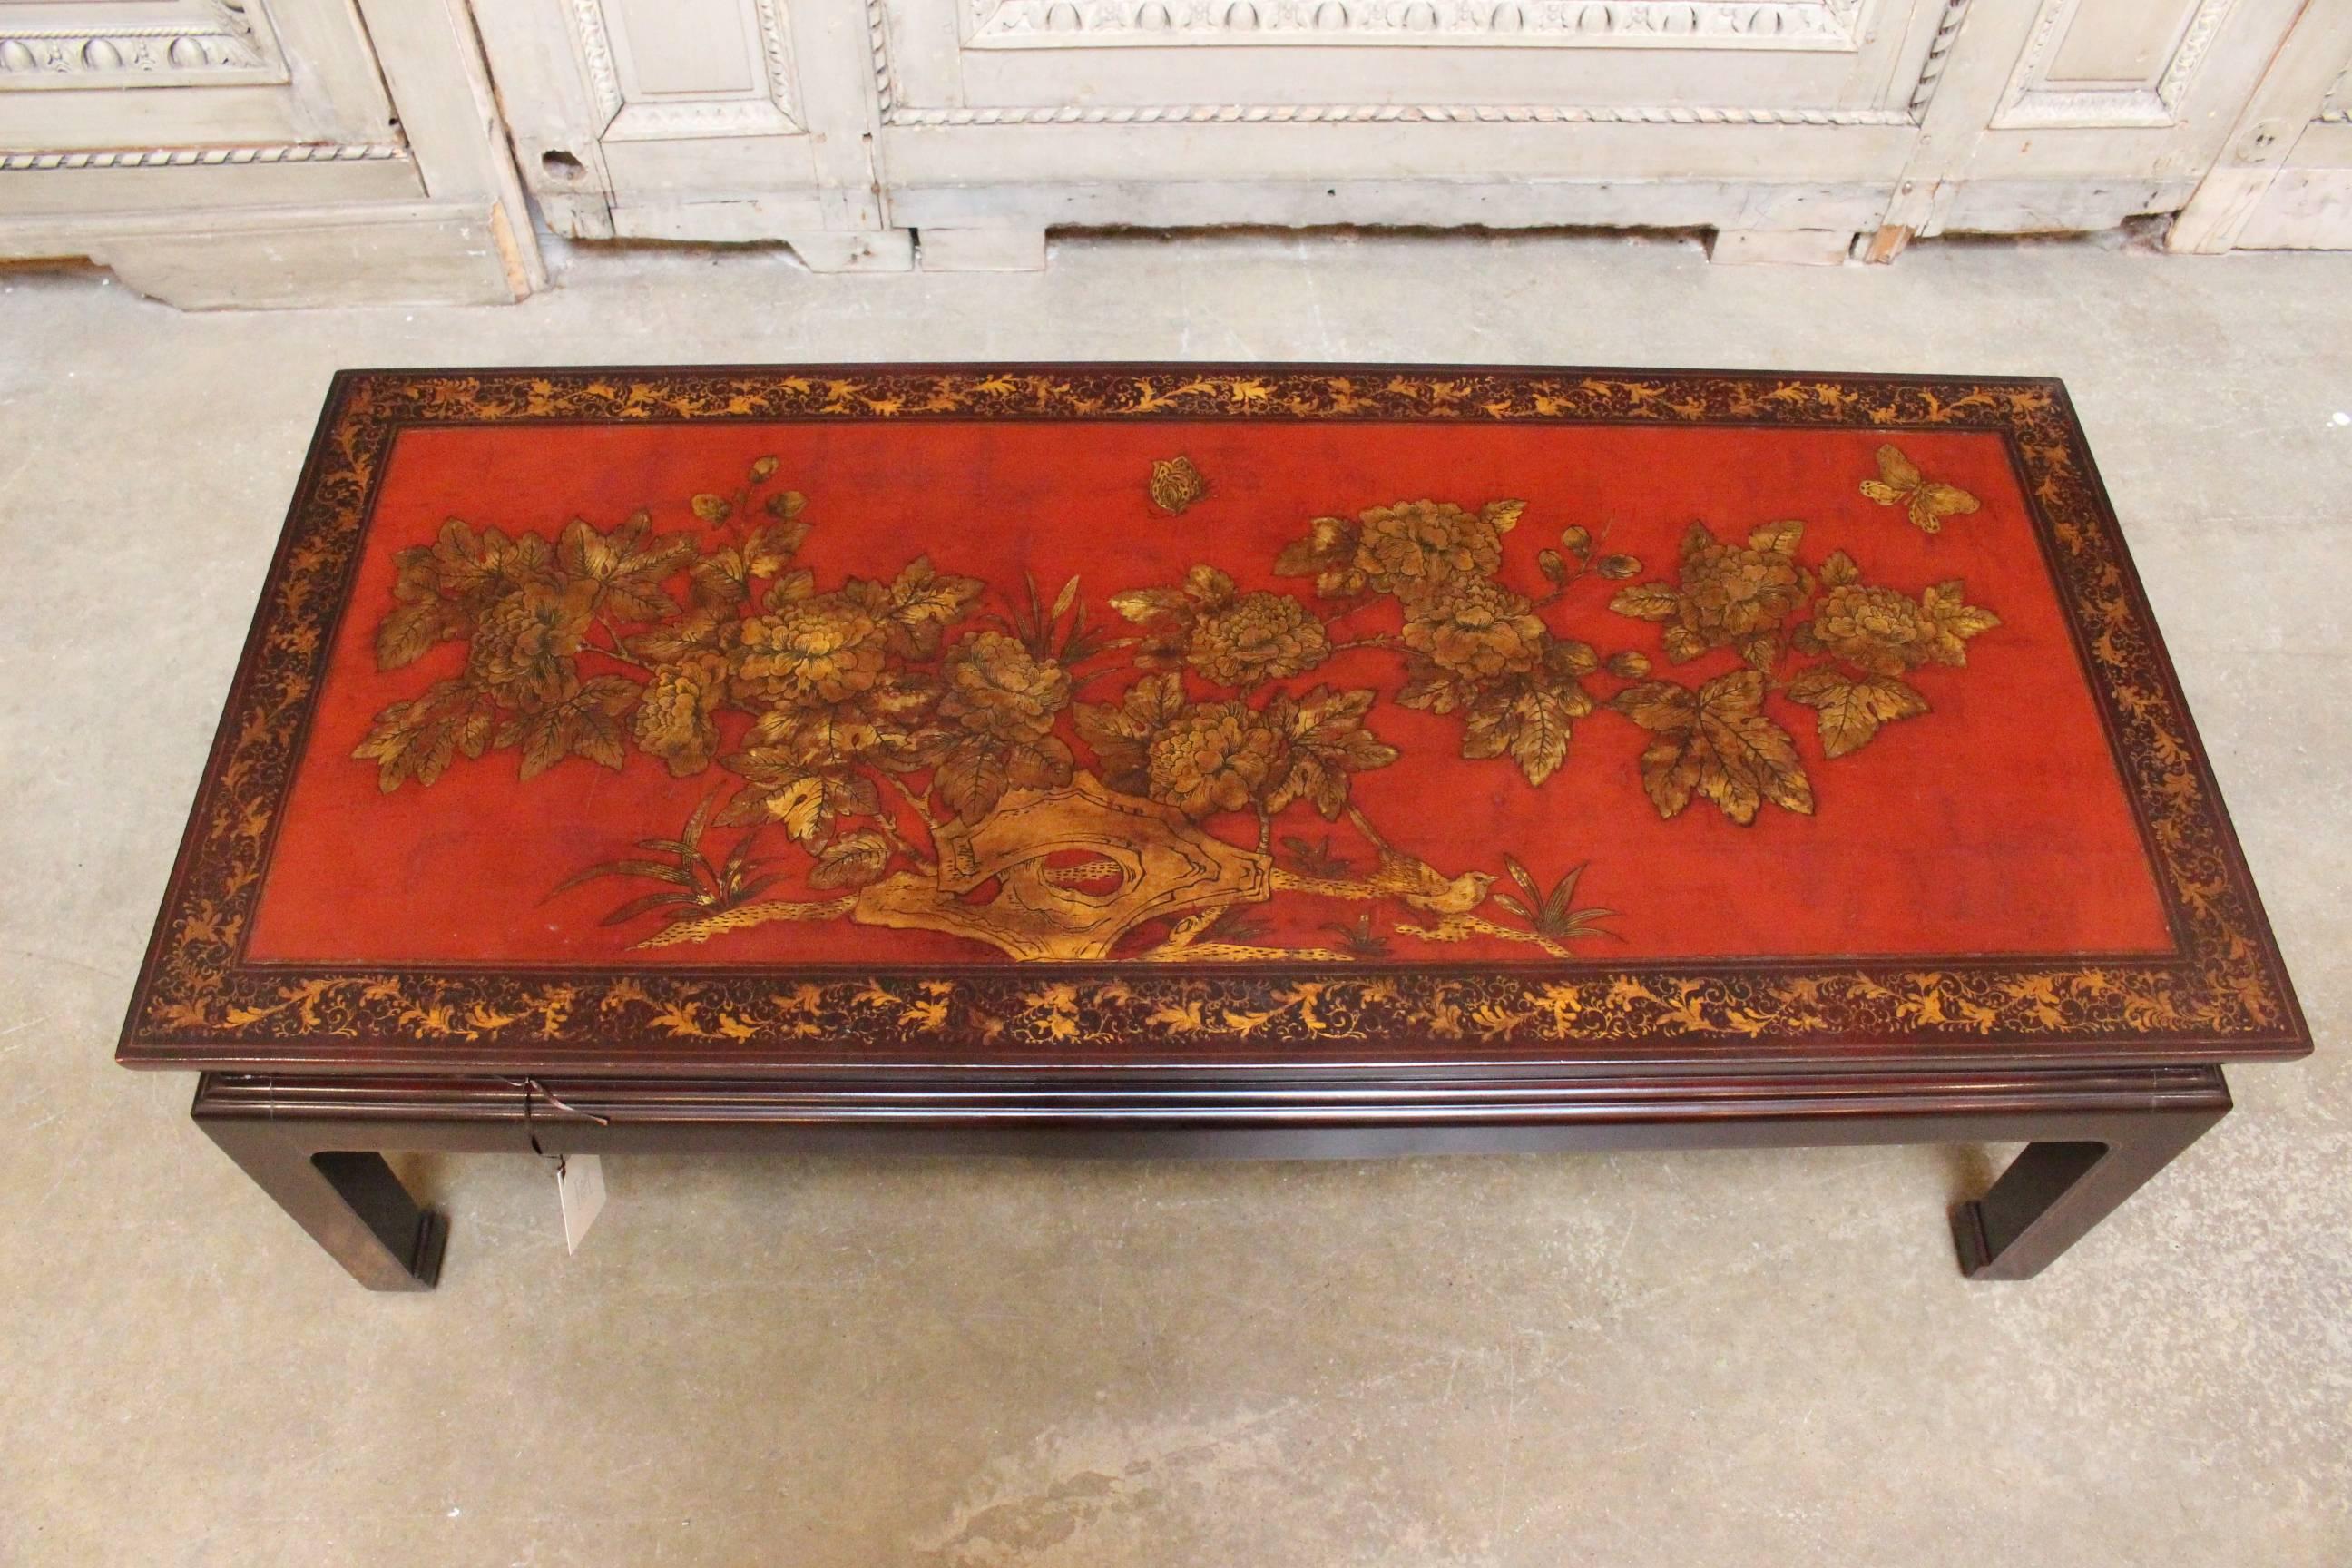 A French chinoiserie style cocktail table with a red and gold lacquered top.
       